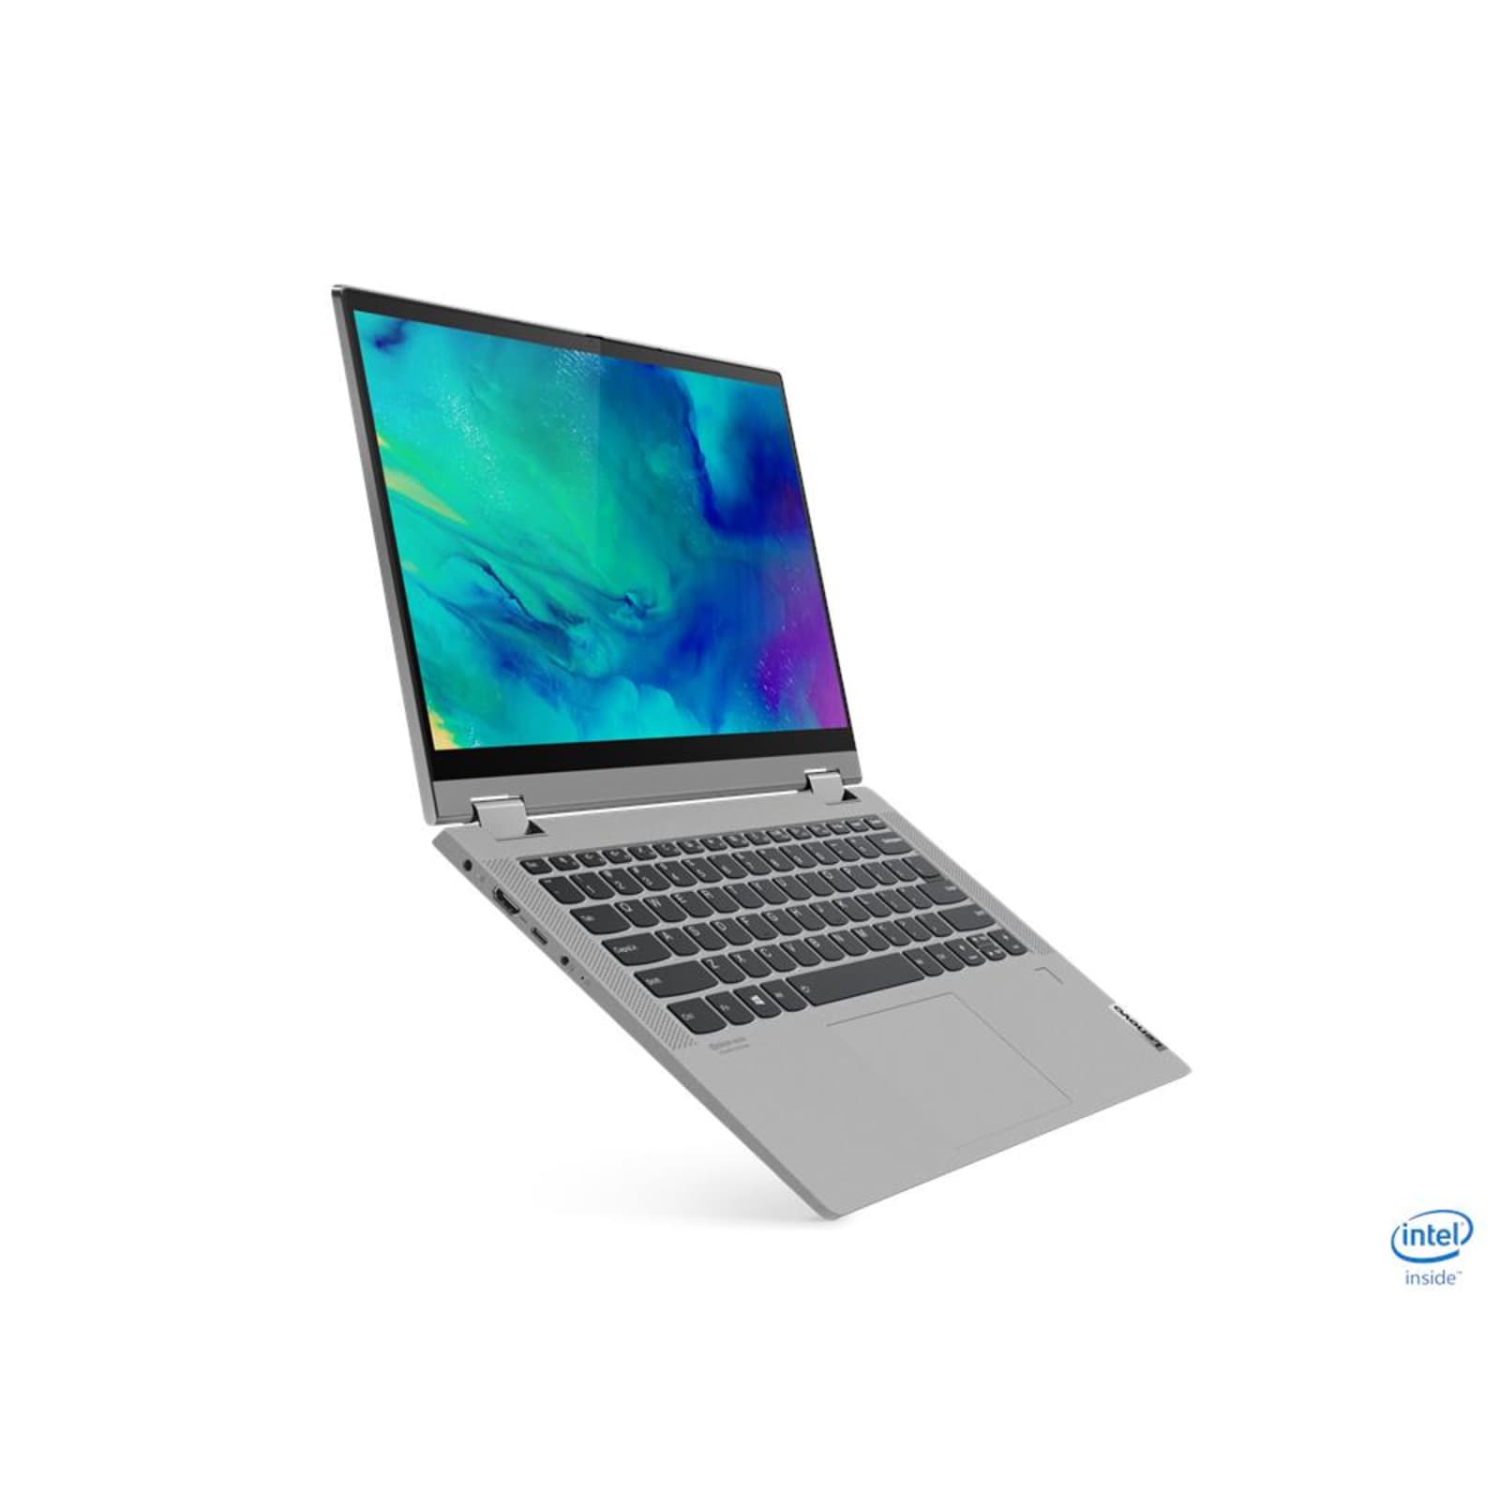 Refurbished (Excellent) Lenovo IdeaPad Flex 5 14ITL05 2-in-1 Laptop | 14" 1920x1080 FHD | Core i3-1115G4 - 2TB SSD Hard Drive - 4GB RAM | 2 cores @ 4.1 GHz Win 10 Home Silver